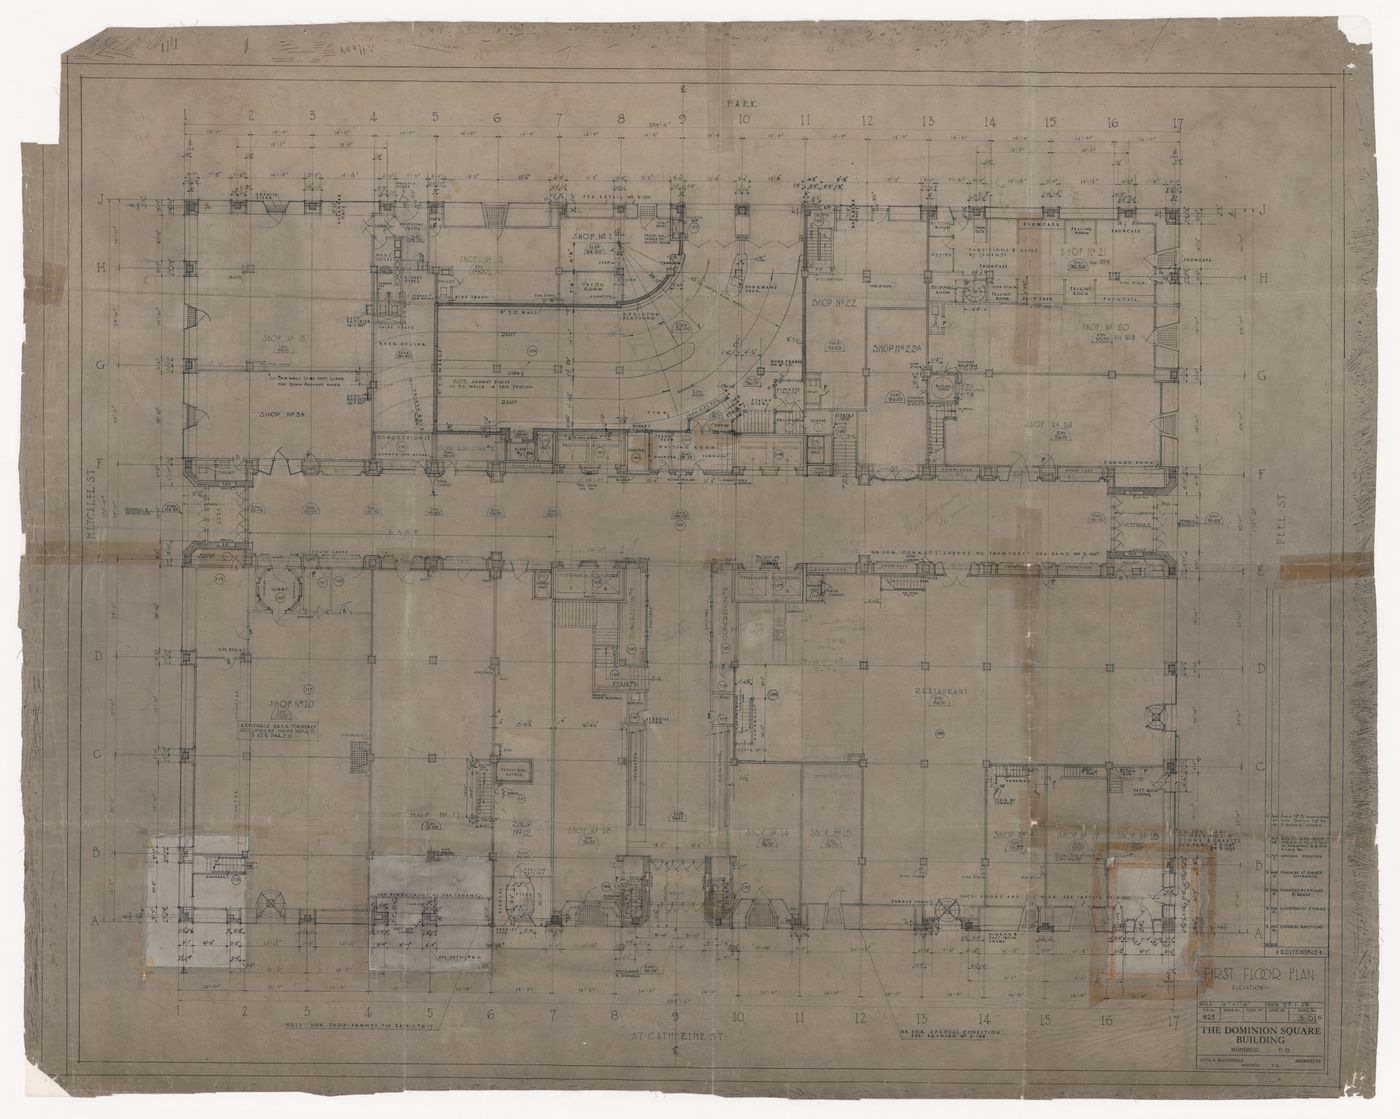 First floor plan for Dominion Square Building, Montreal, Québec